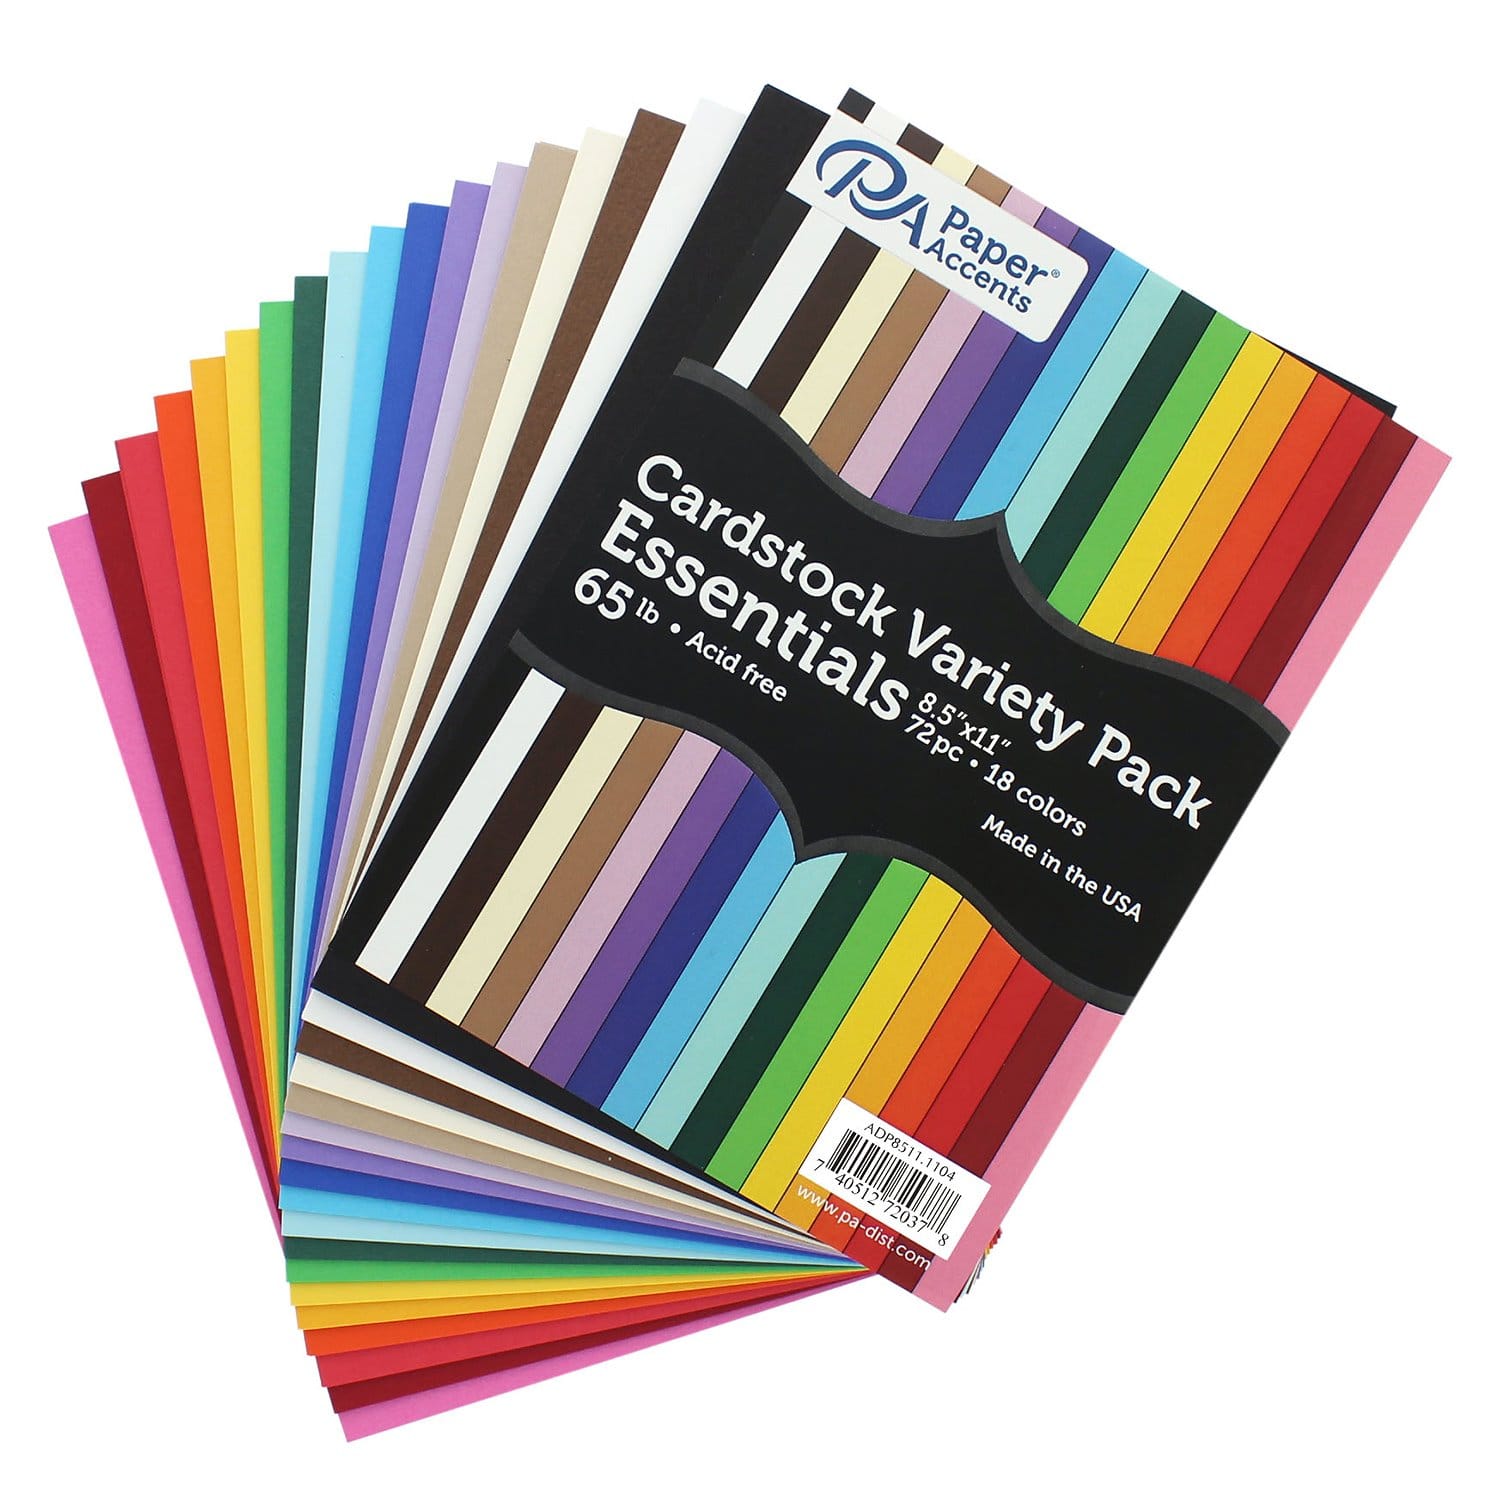 8.5 x 11 Everyday Essentials Cardstock Paper Pack 180ct by Park Lane